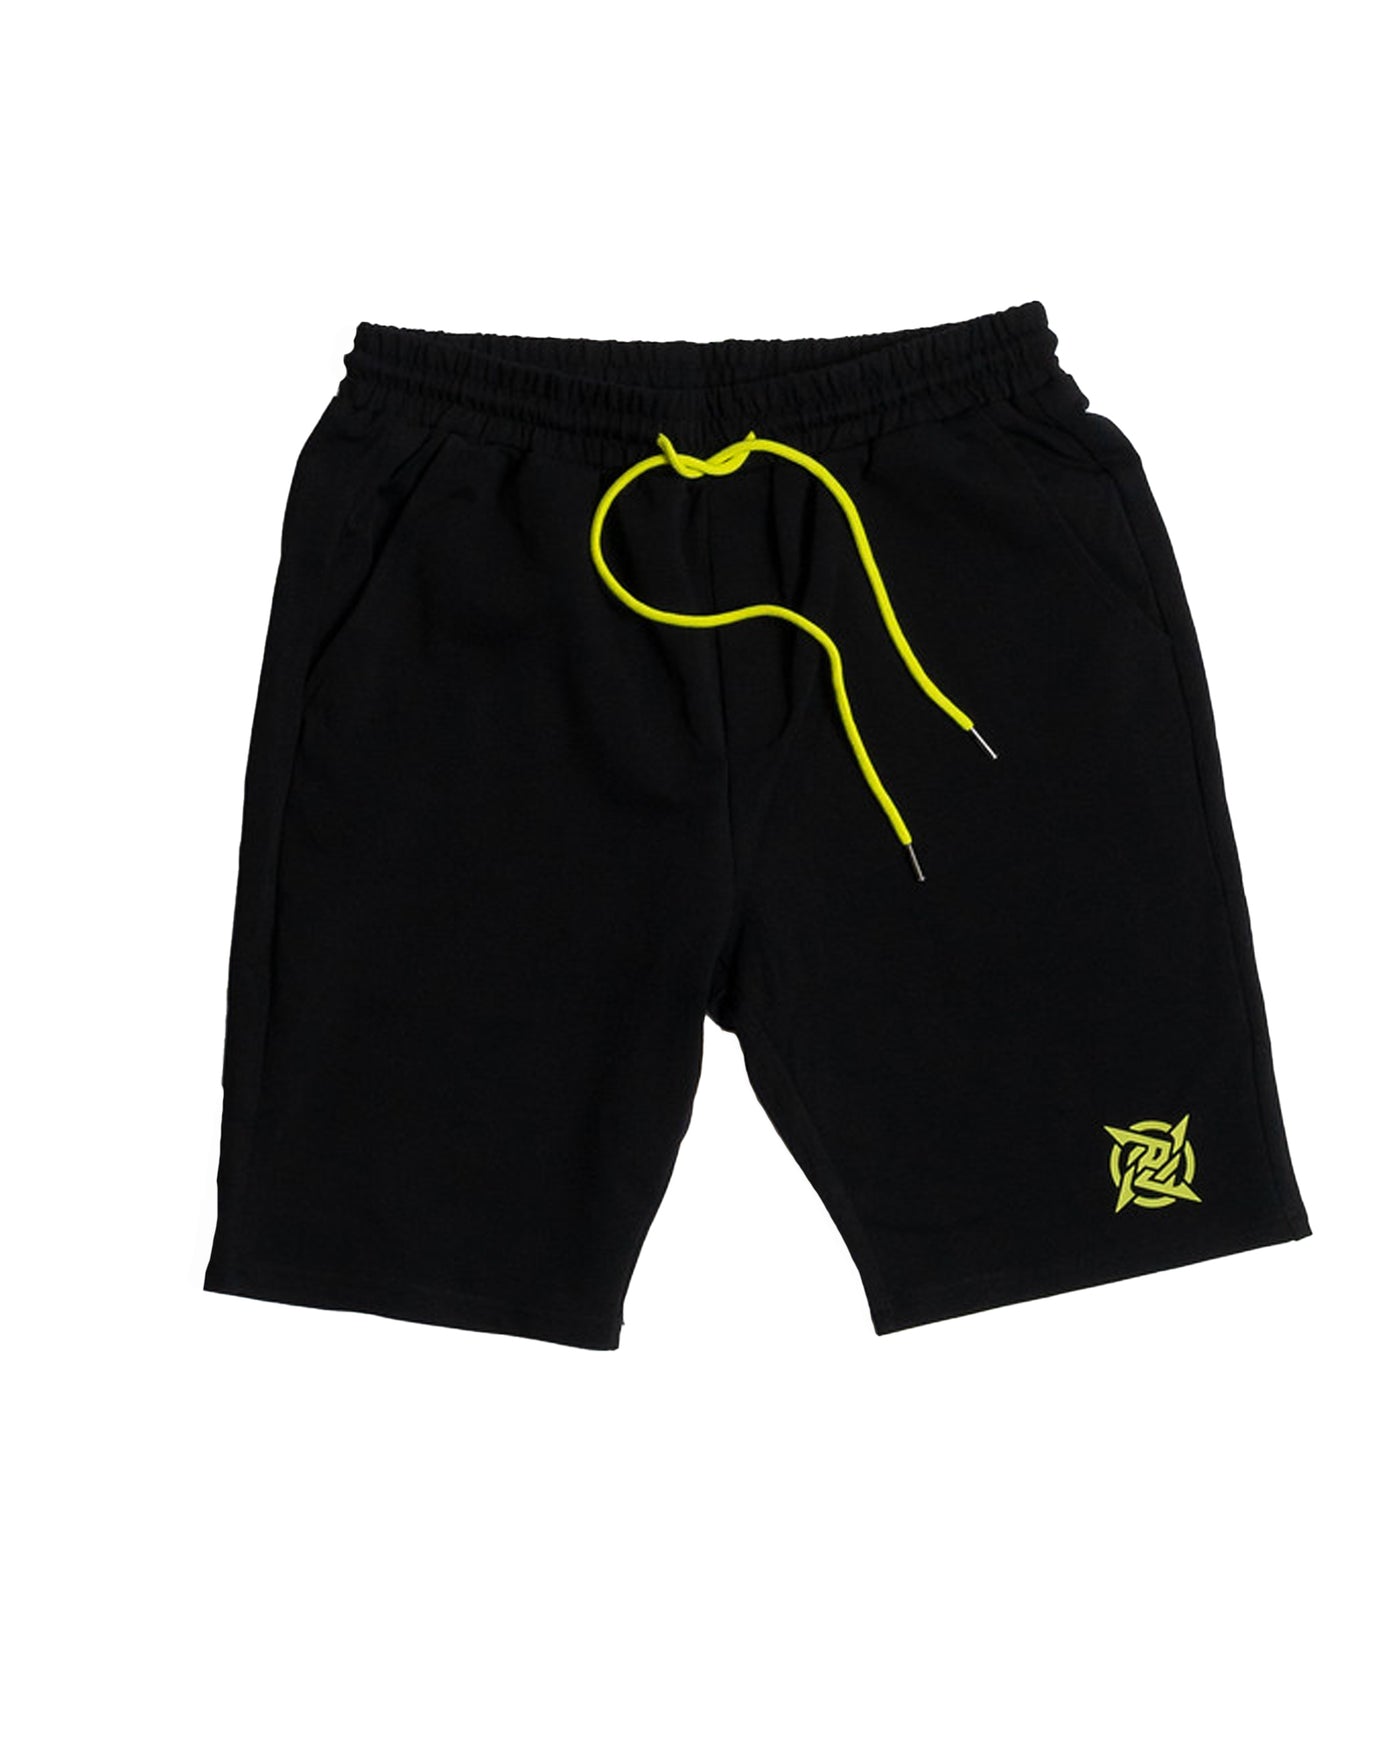 Lagom Collection - Black Shorts from Ninjas in Pyjamas Shop. A pair of black shorts from the Lagom Merch Collection, featuring the subtle Ninjas in Pyjamas logo on the side. These comfortable and stylish shorts are perfect for casual wear or as activewear, allowing you to showcase your support for NIP and esports in ultimate comfort and style.